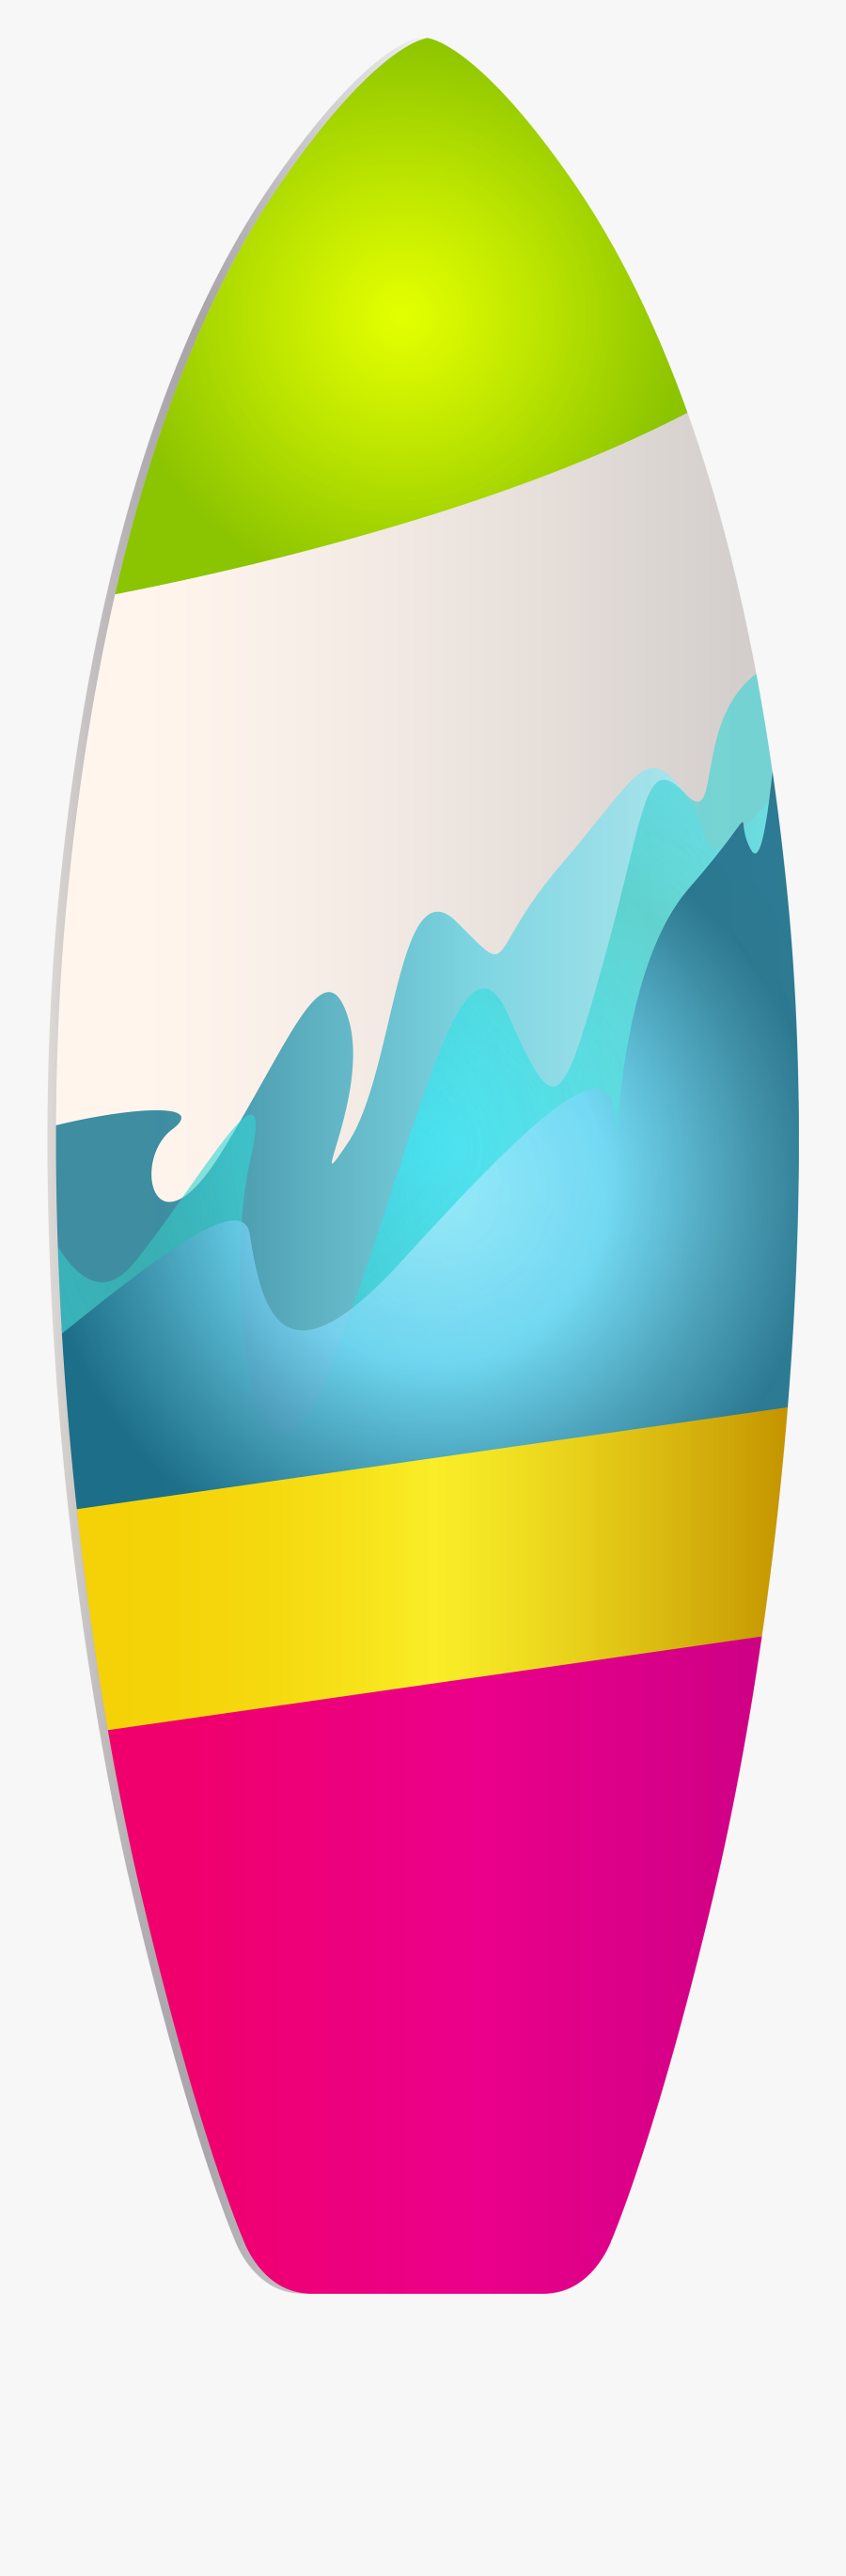 Clipart Png Summer - Surf Board Clipart Png, Transparent Clipart